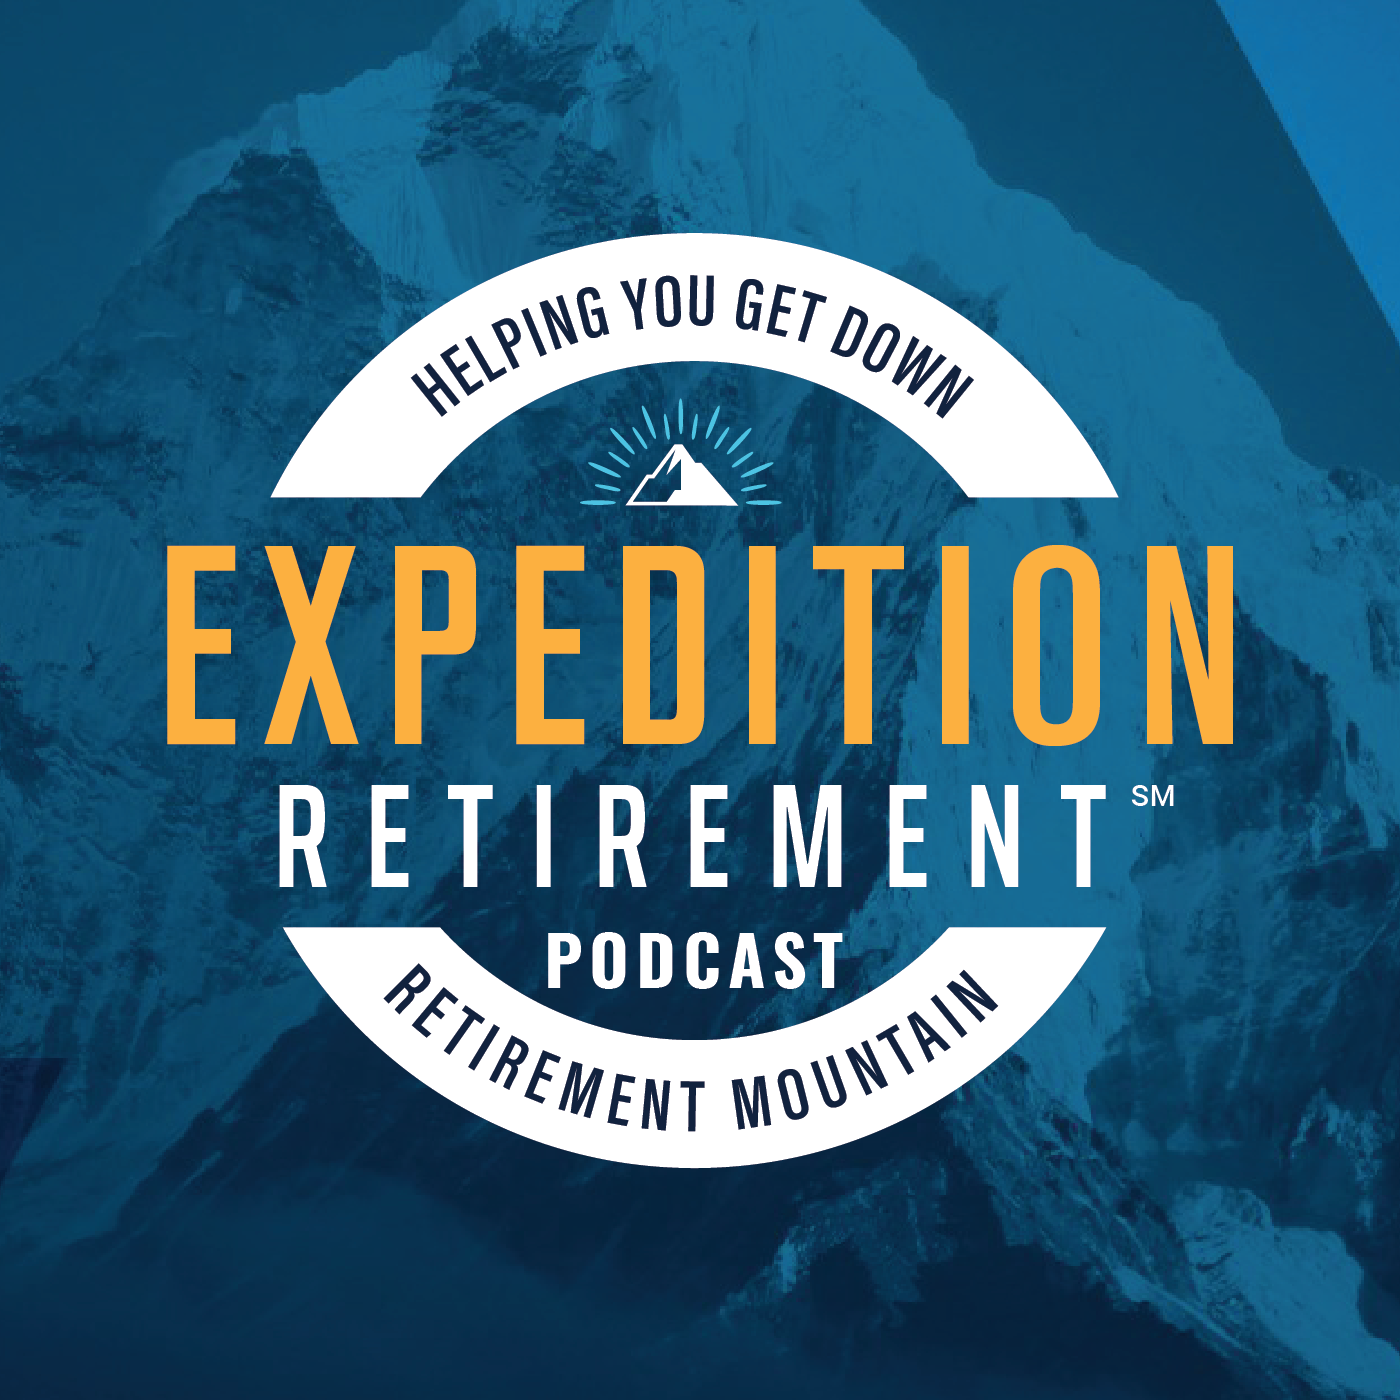 Retirement Advice from the real “Wolf of Wall Street” | Why Golden Reserve does tax planning AND tax preparation | Your past financial mistakes shouldn’t hold you back from a successful retirement | Are you napping on your 401(k)?